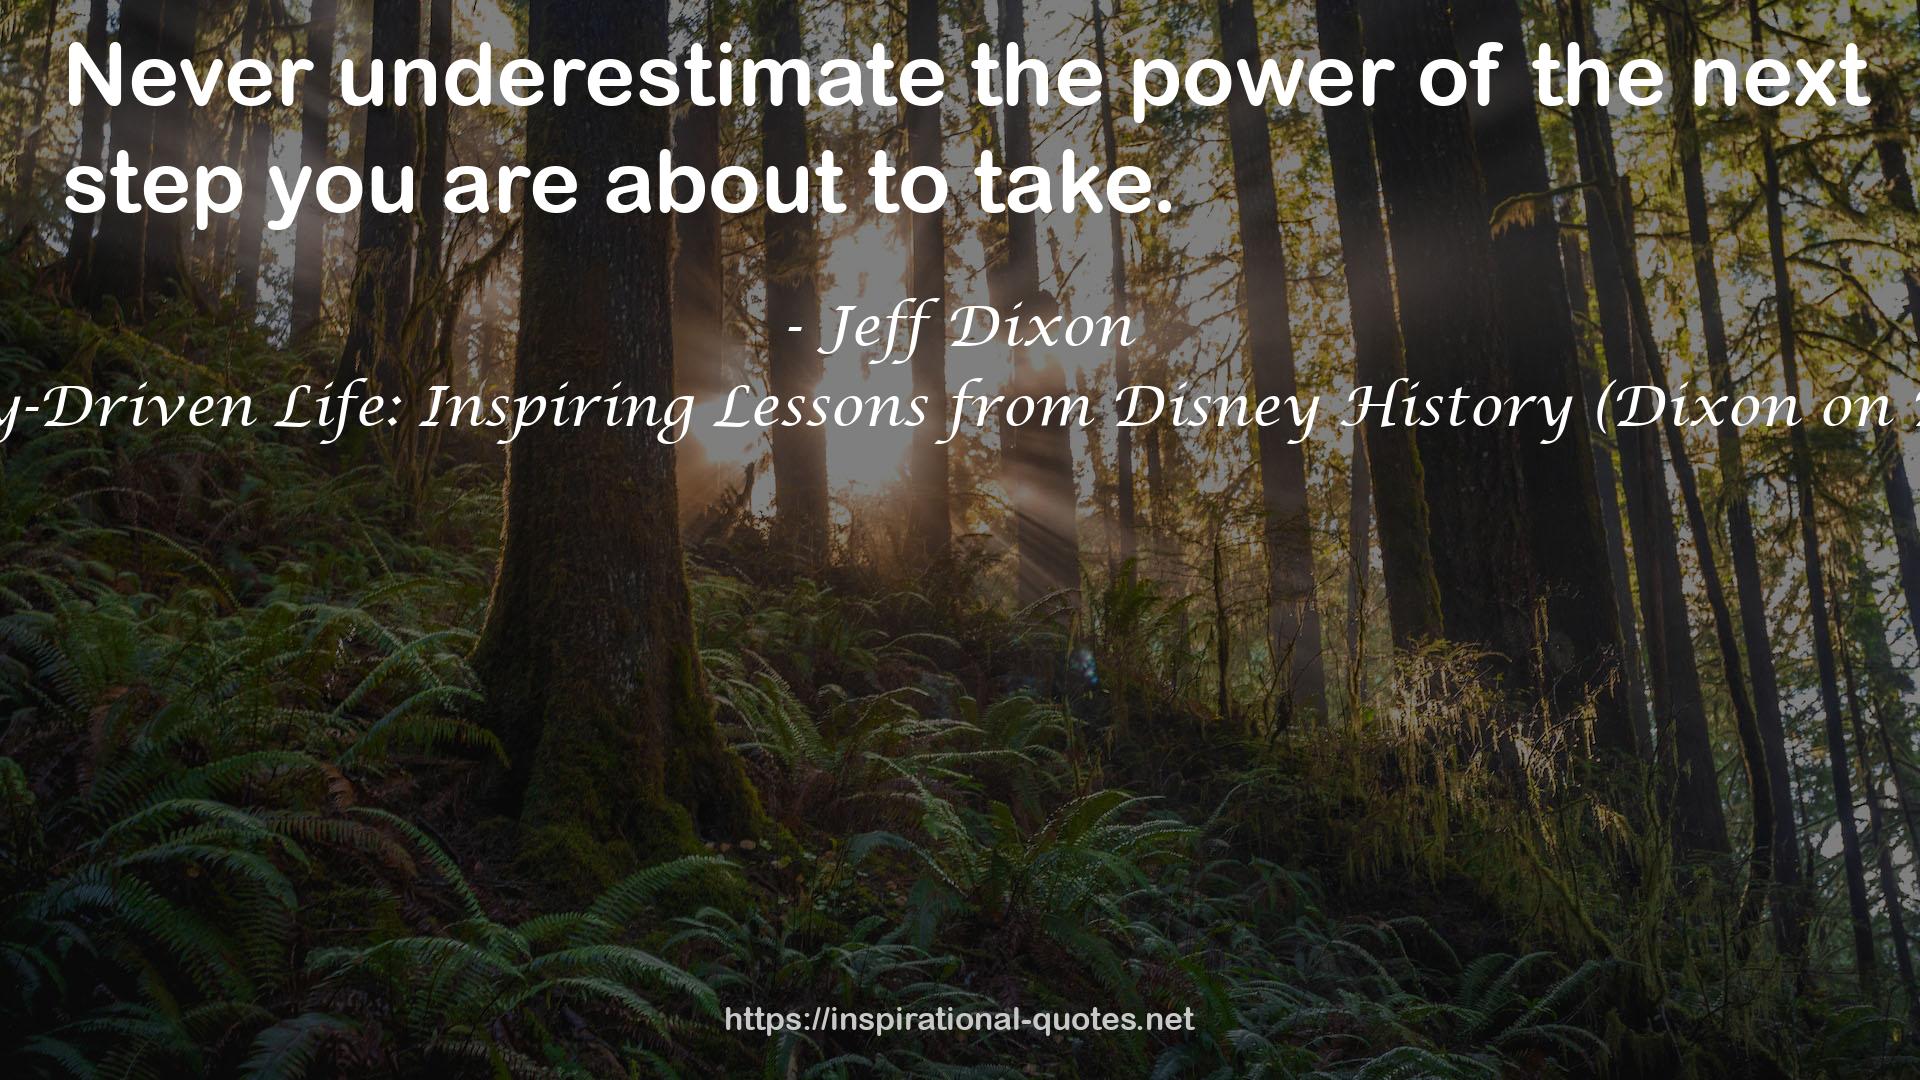 The Disney-Driven Life: Inspiring Lessons from Disney History (Dixon on Disney, #1) QUOTES